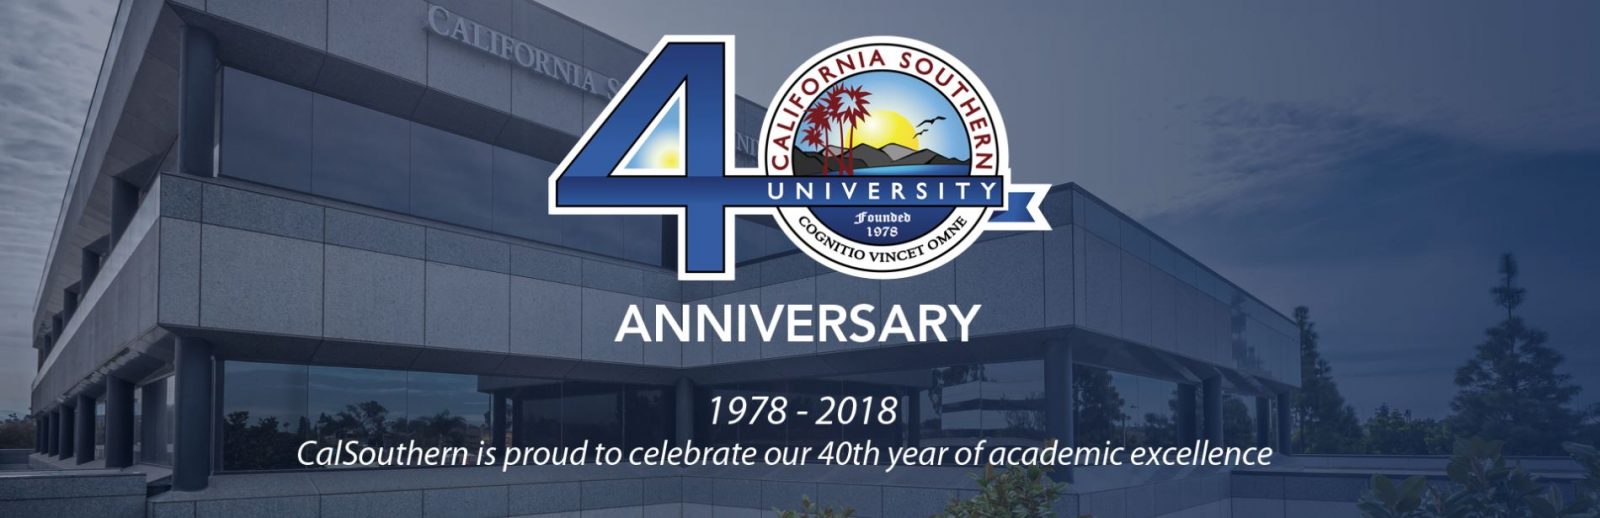 CalSouthern Announces 40th Anniversary